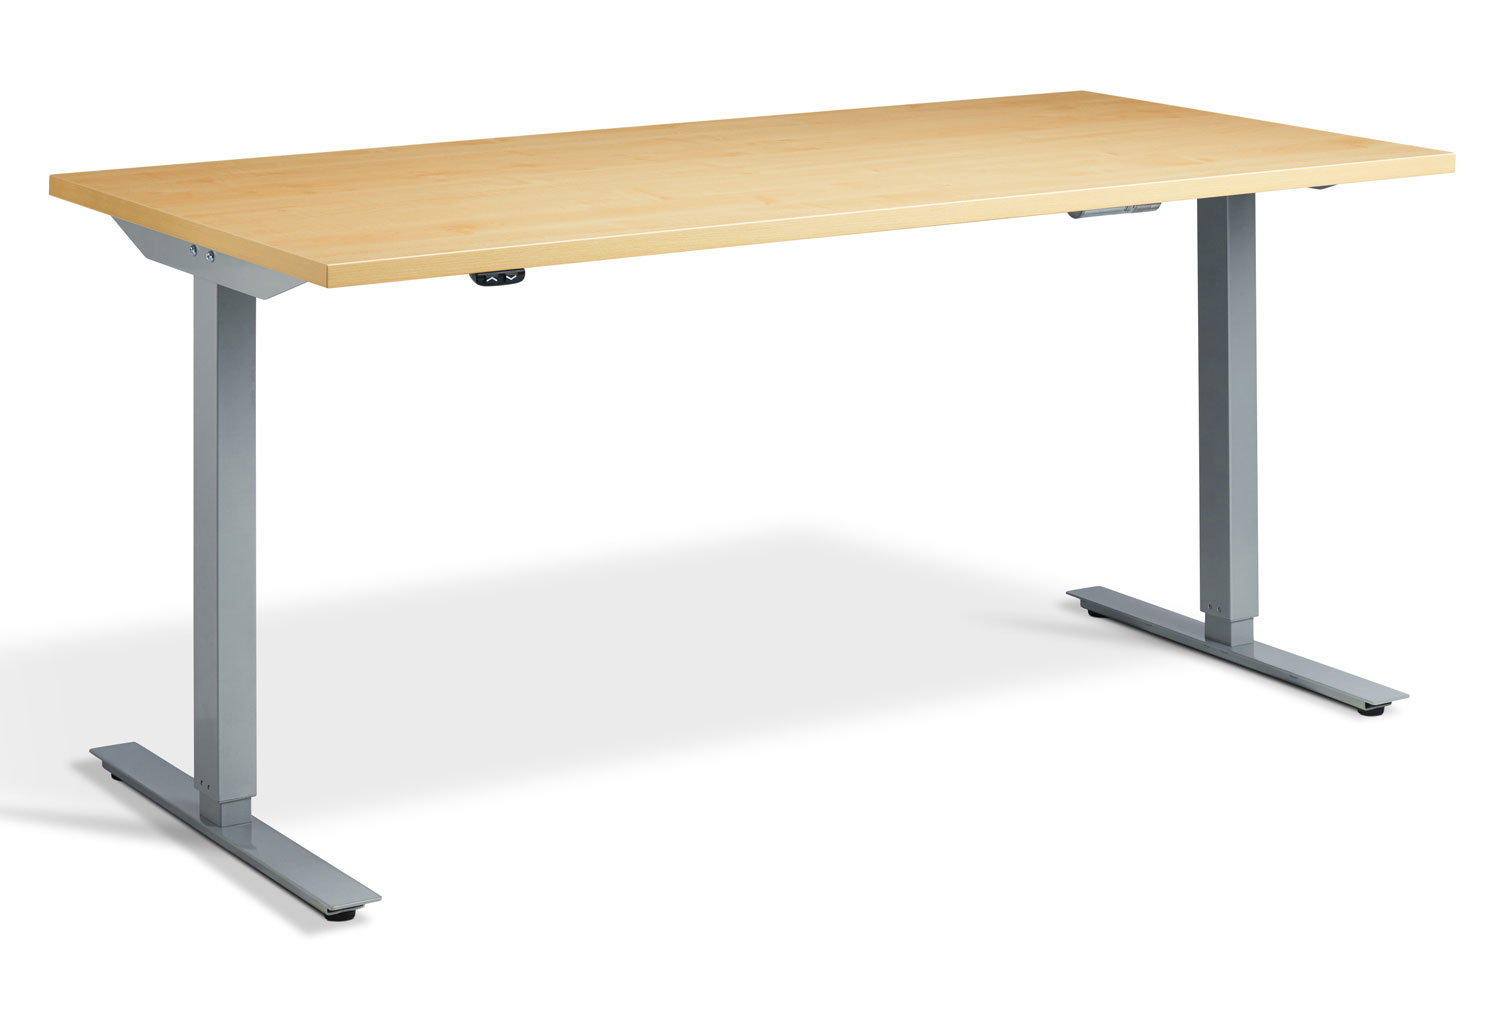 Calgary Dual Motor Height Adjustable Office Desk, 160wx80dx70-120h (cm), Silver Frame, Oak, Express Delivery